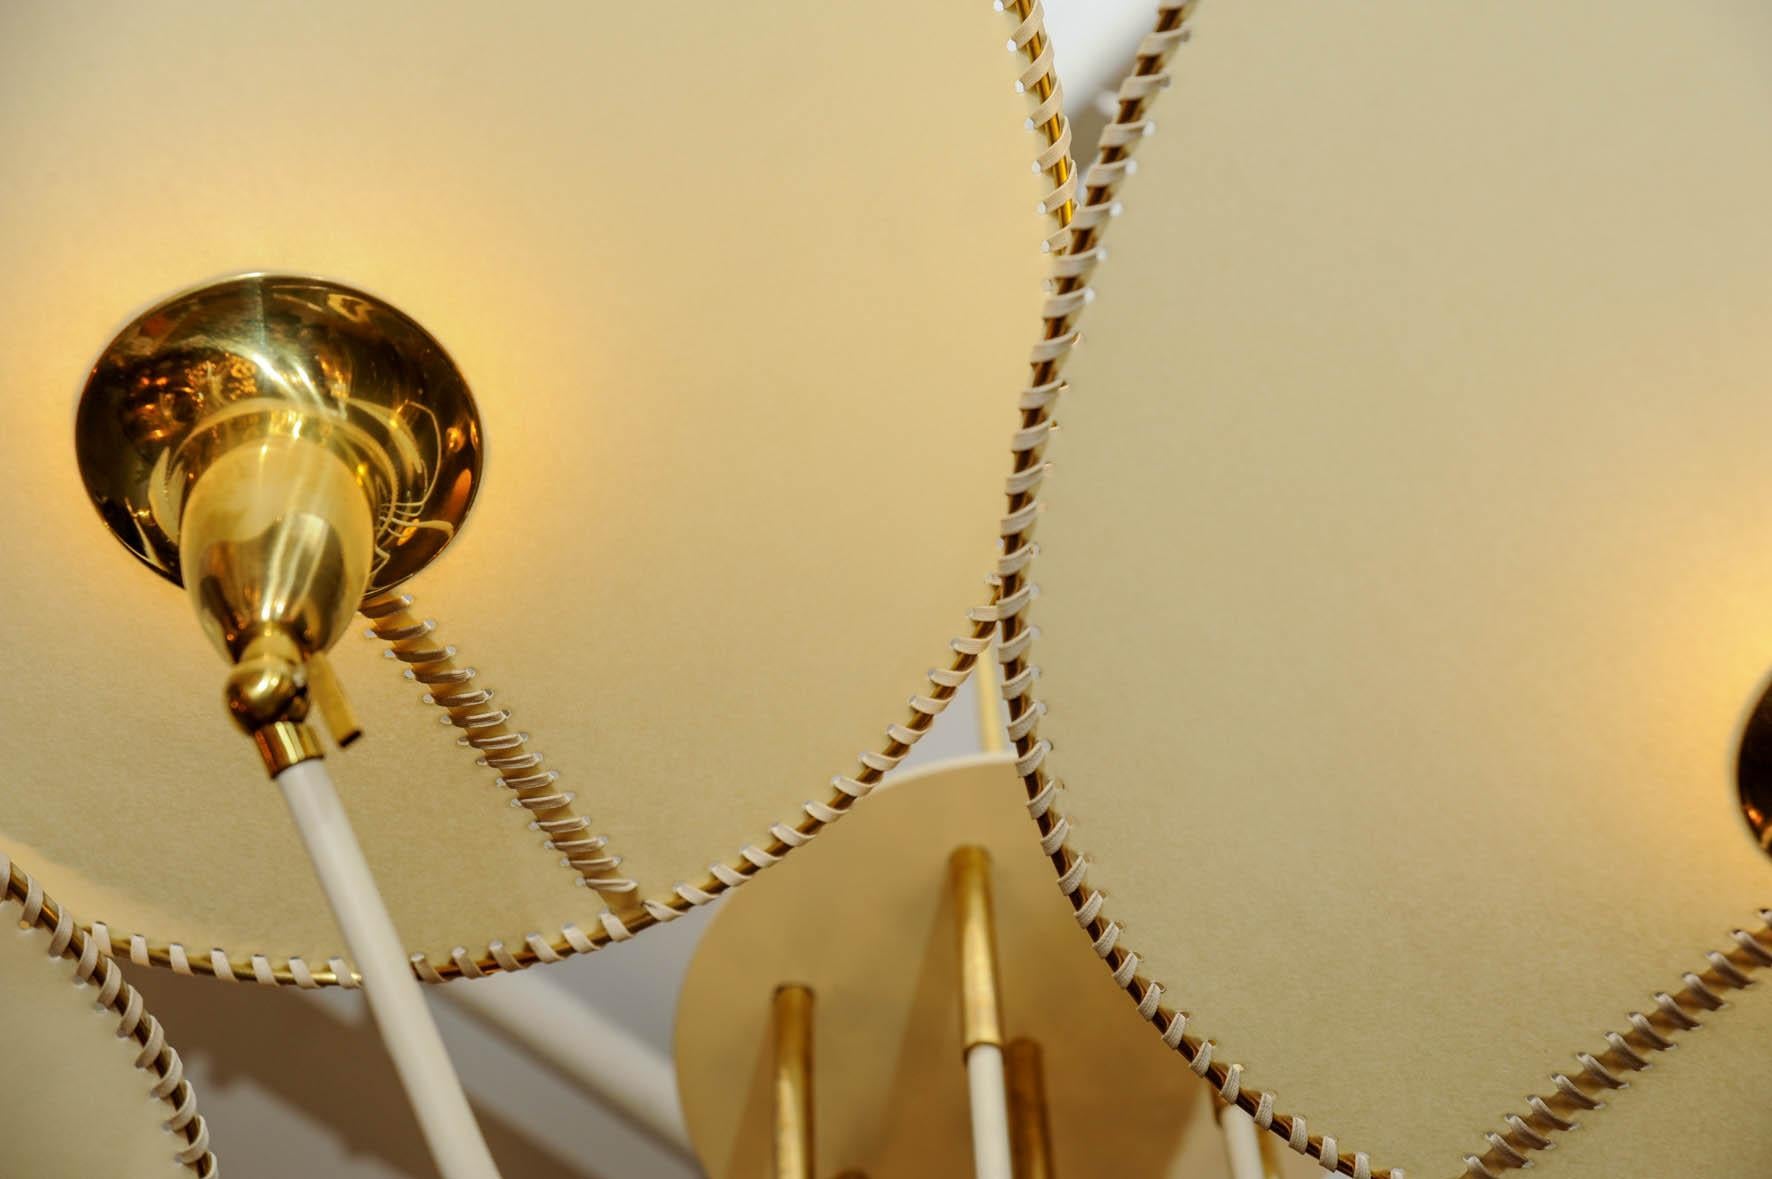 Italian Brass and Parchment Paper Chandelier by Diego Mardegan for Glustin Luminaires